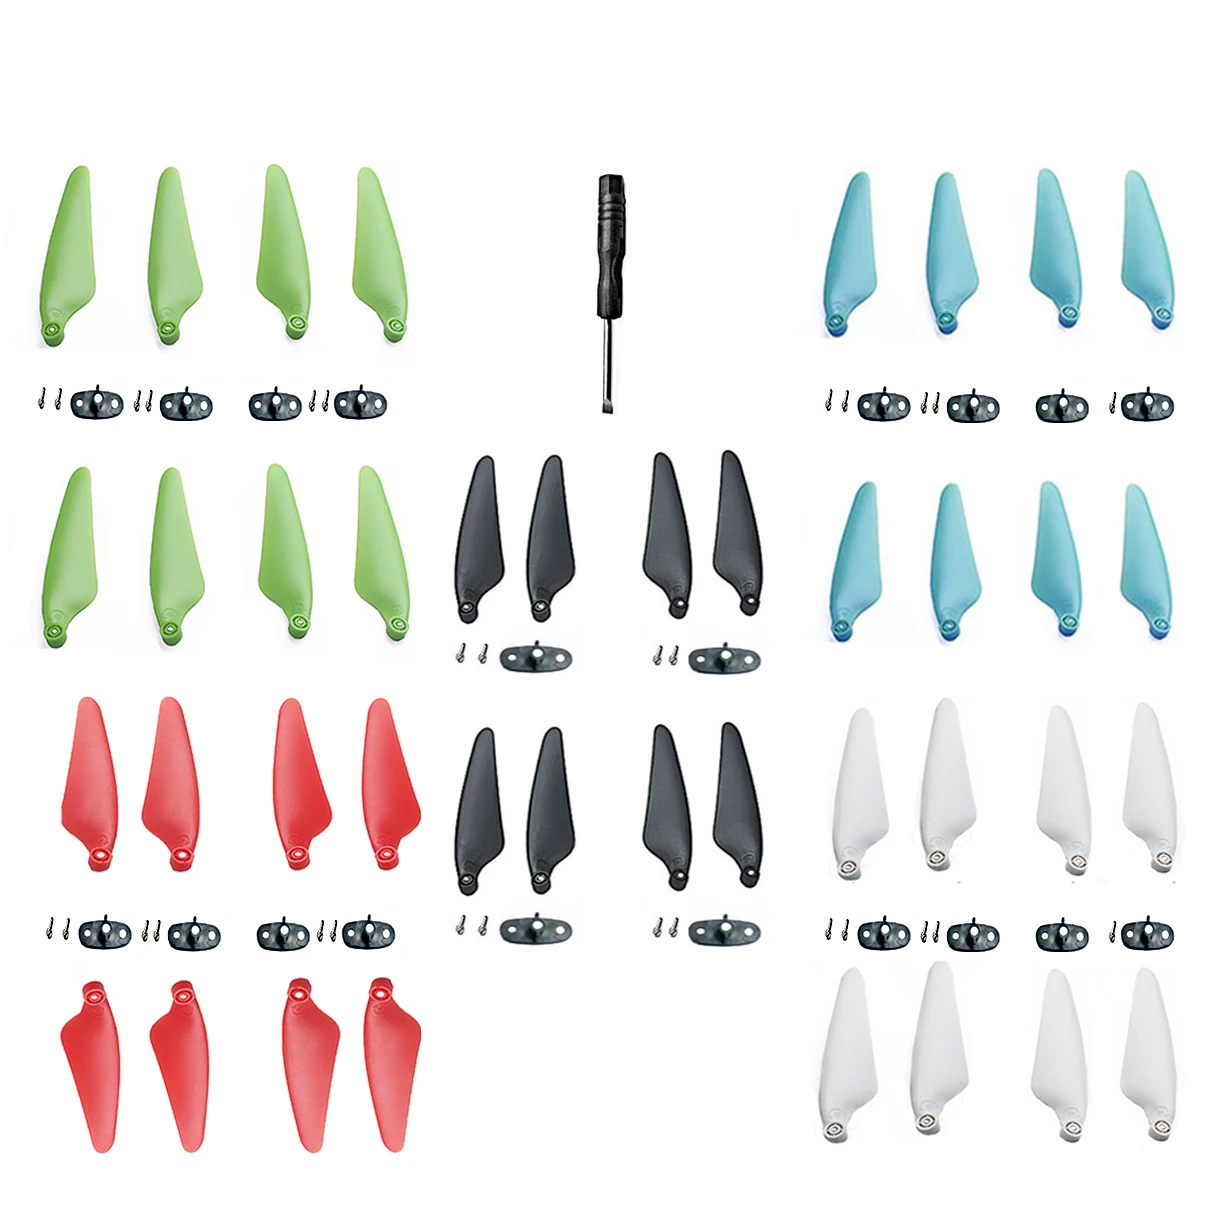 

New 16 Pieces of Propeller for Hubsan Zino PRO Zino 2 H117S Aerial Four-axis Aircraft Accessories Remote Drone CW CCW Shovel Toy